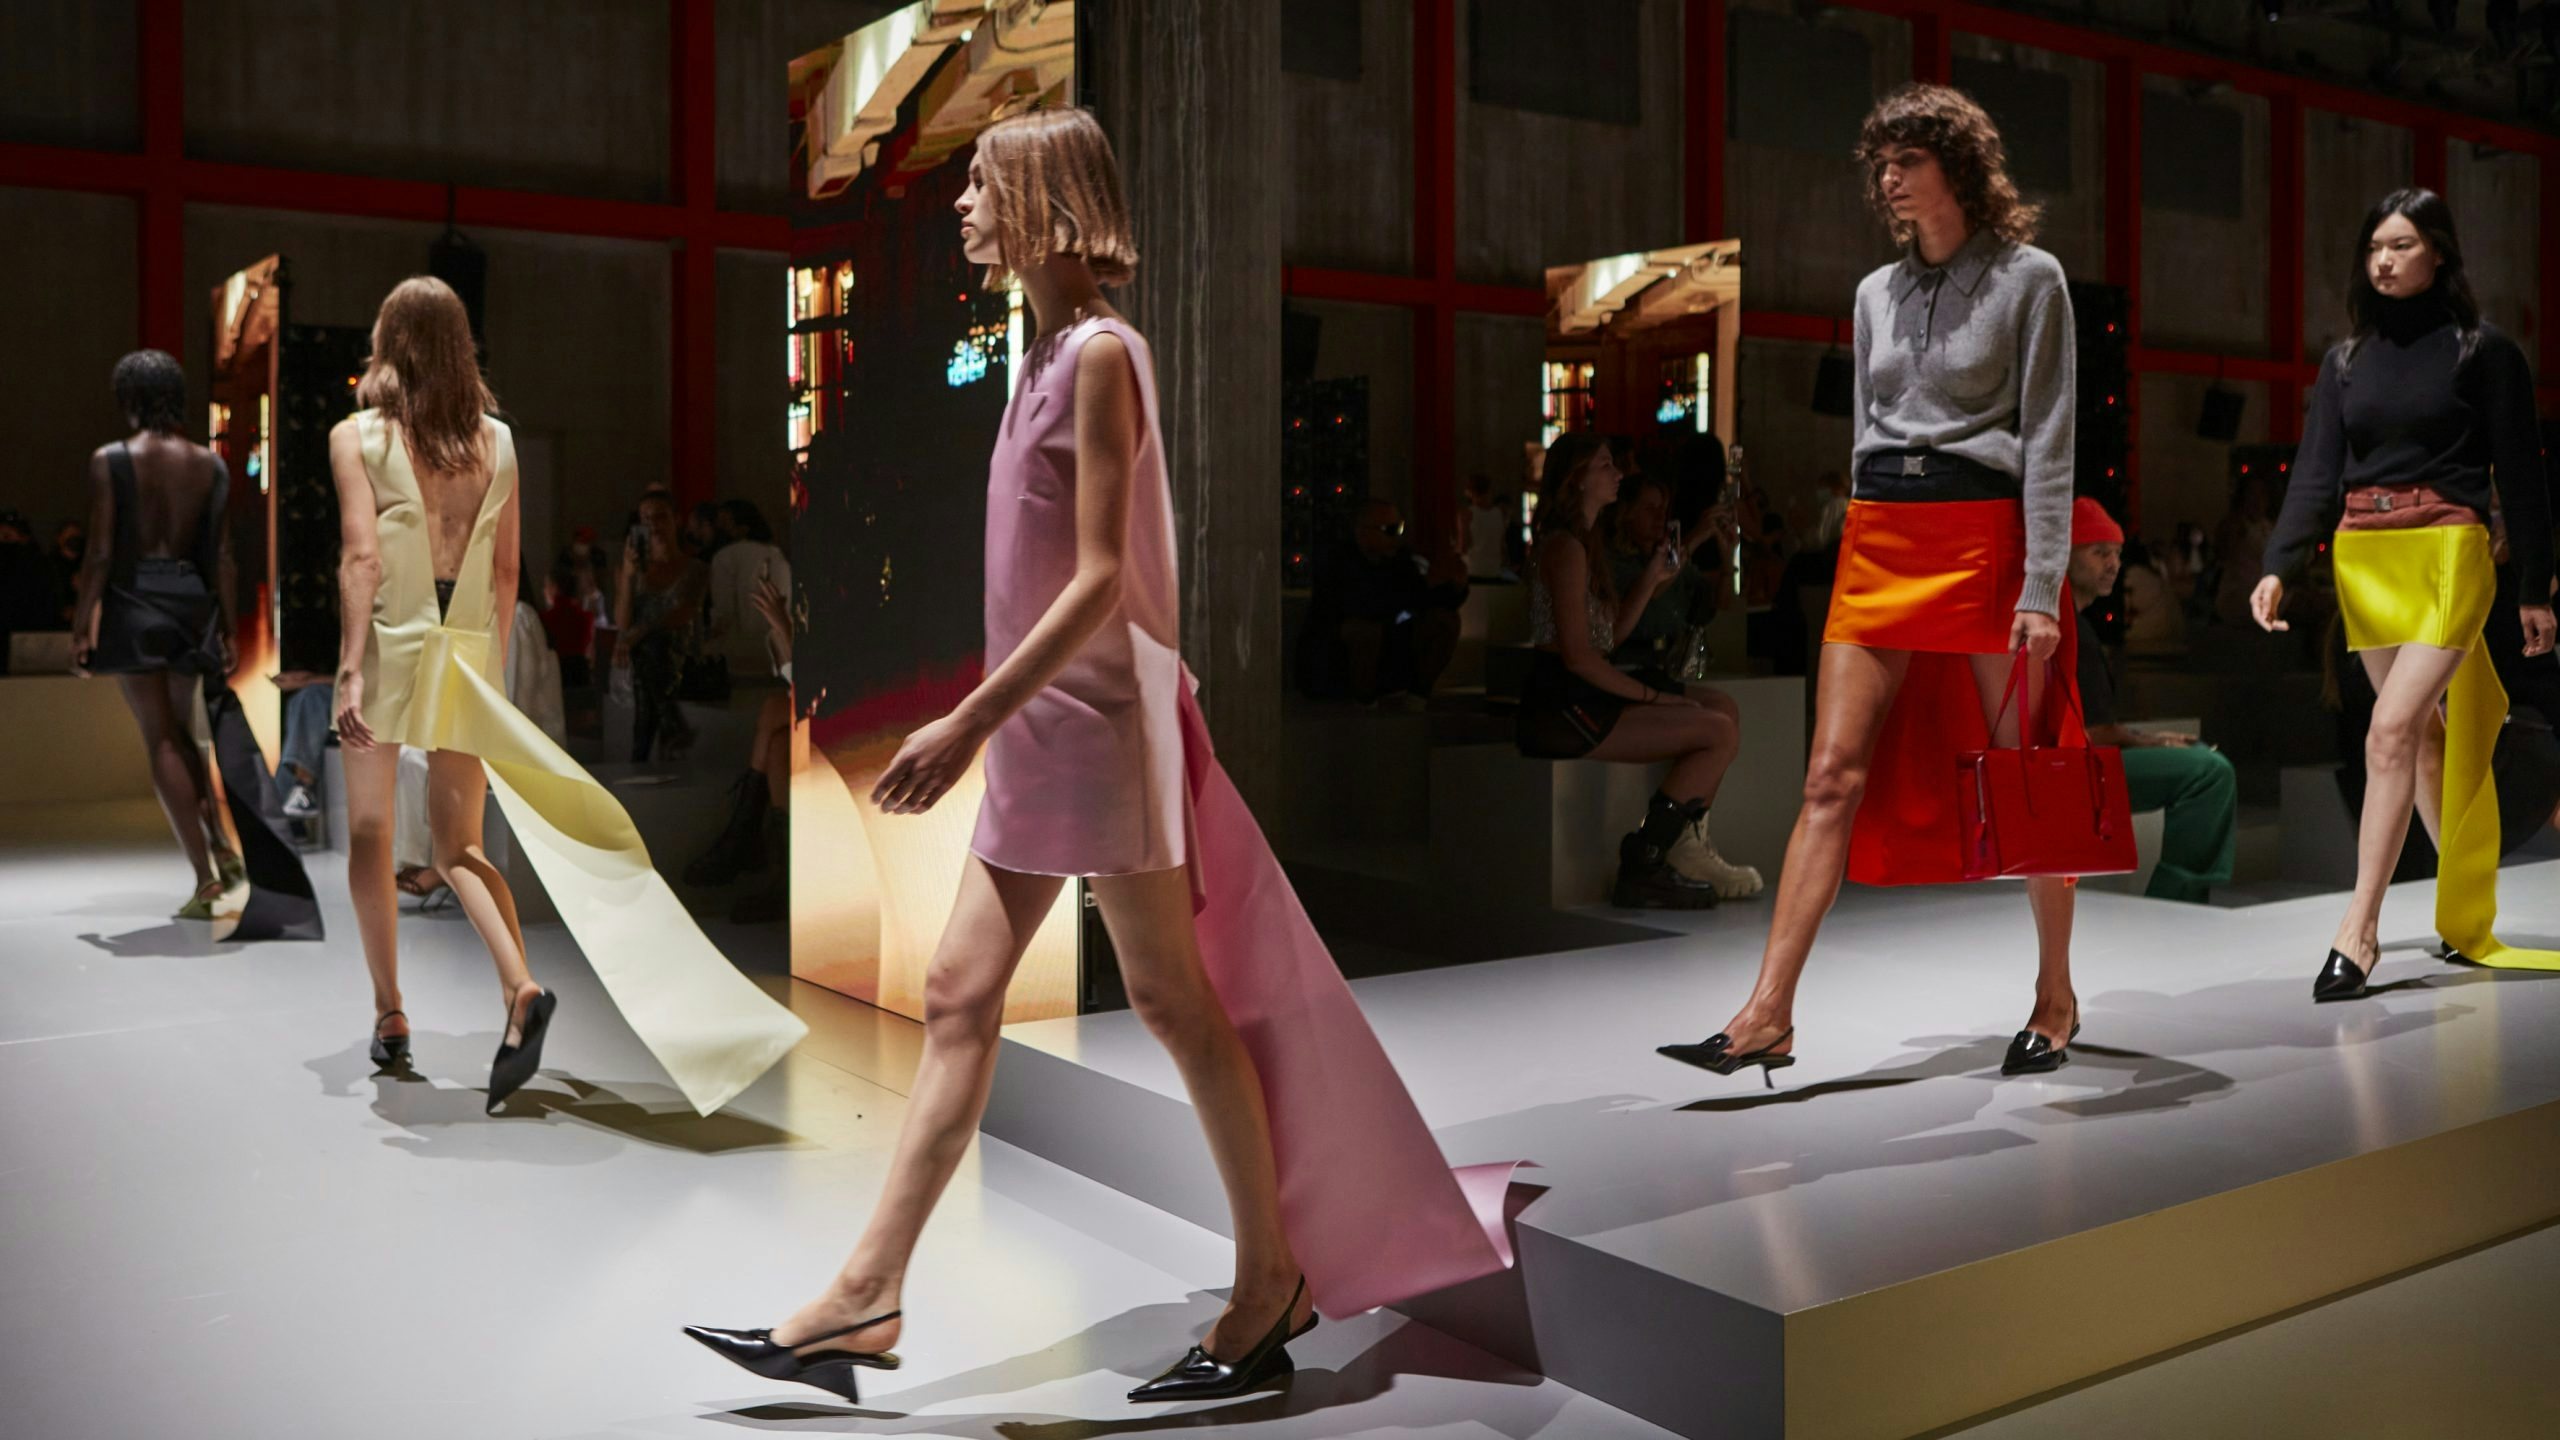 Prada’s sales performance has exceeded 2019 levels. Given the positive outlook, will the company meet its ambitious plan to reach $5 billion in revenue in the midterm? Photo: Courtesy of Prada